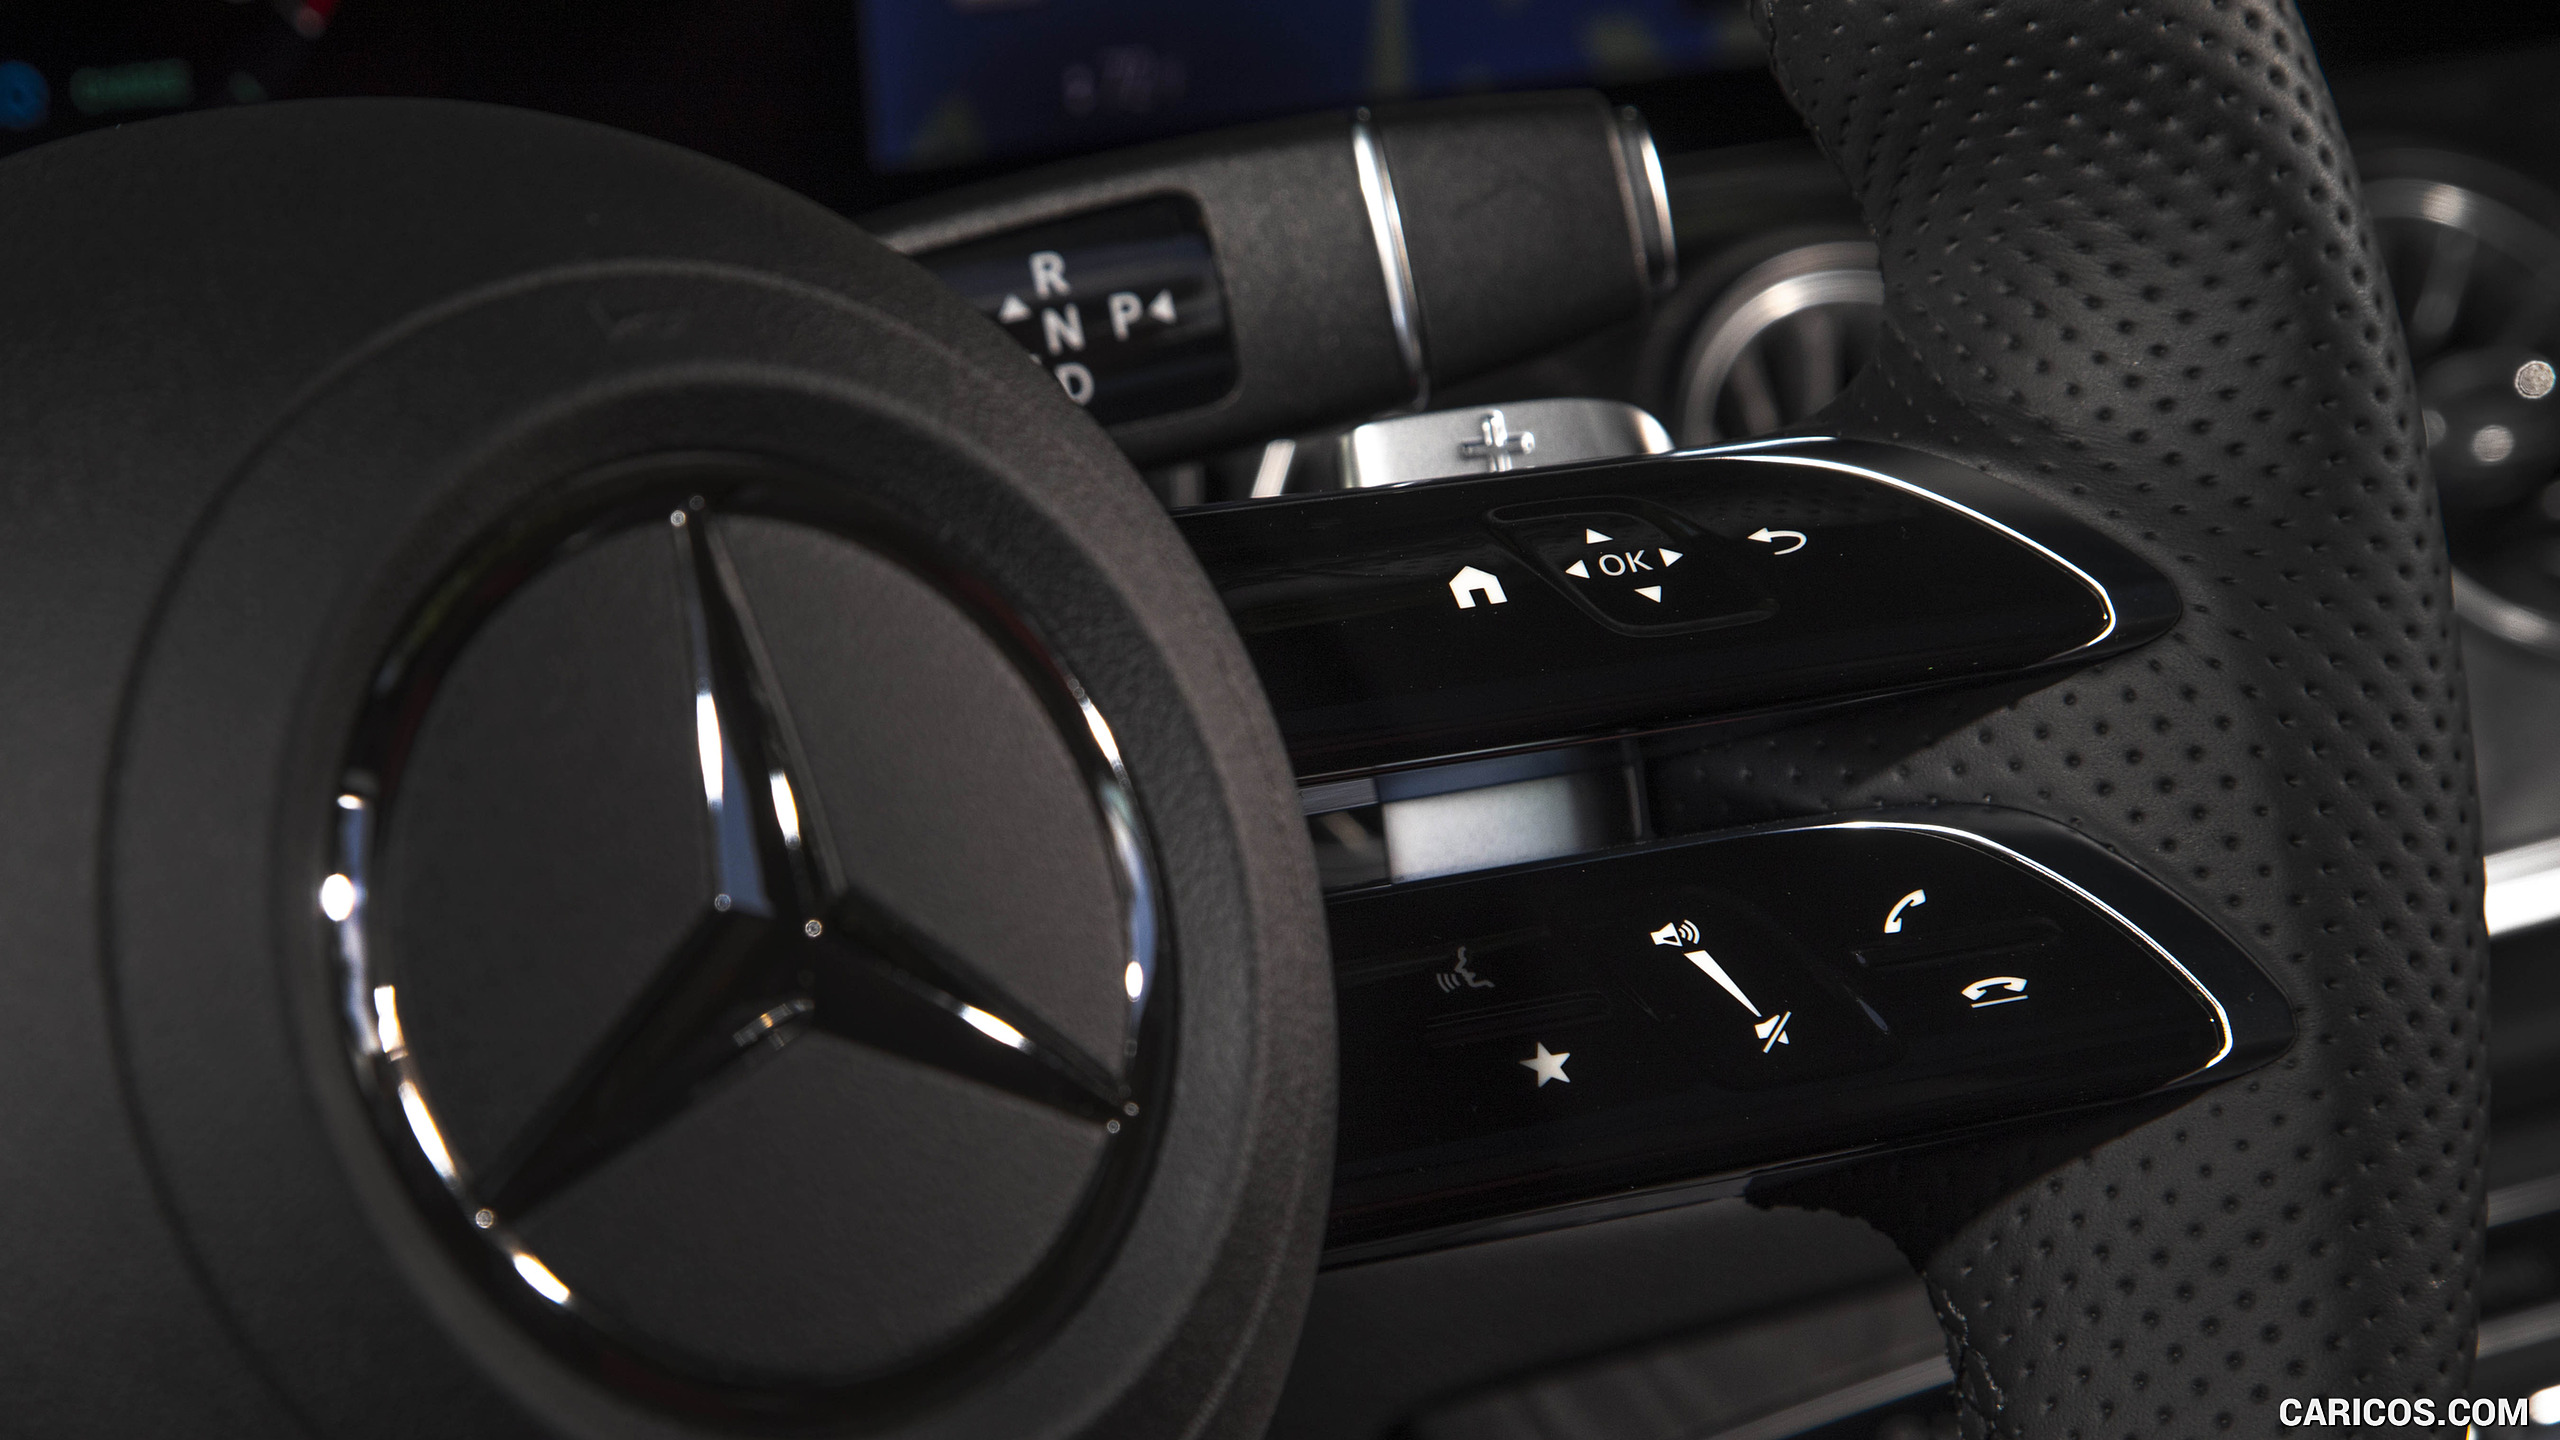 2021 Mercedes-Benz E 450 4MATIC Coupe (US-Spec) - Interior, Steering Wheel, #38 of 49